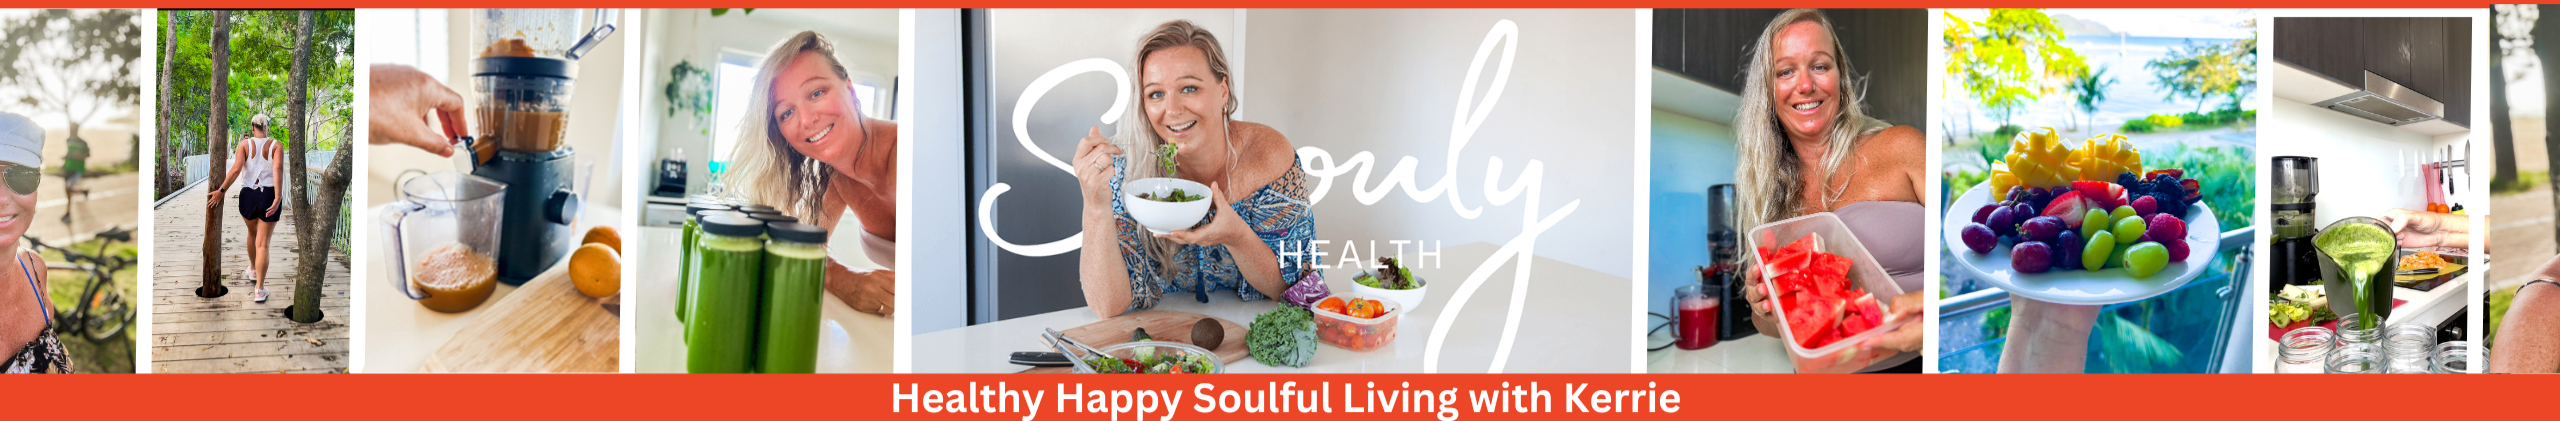 Souly Health You Tube Banner